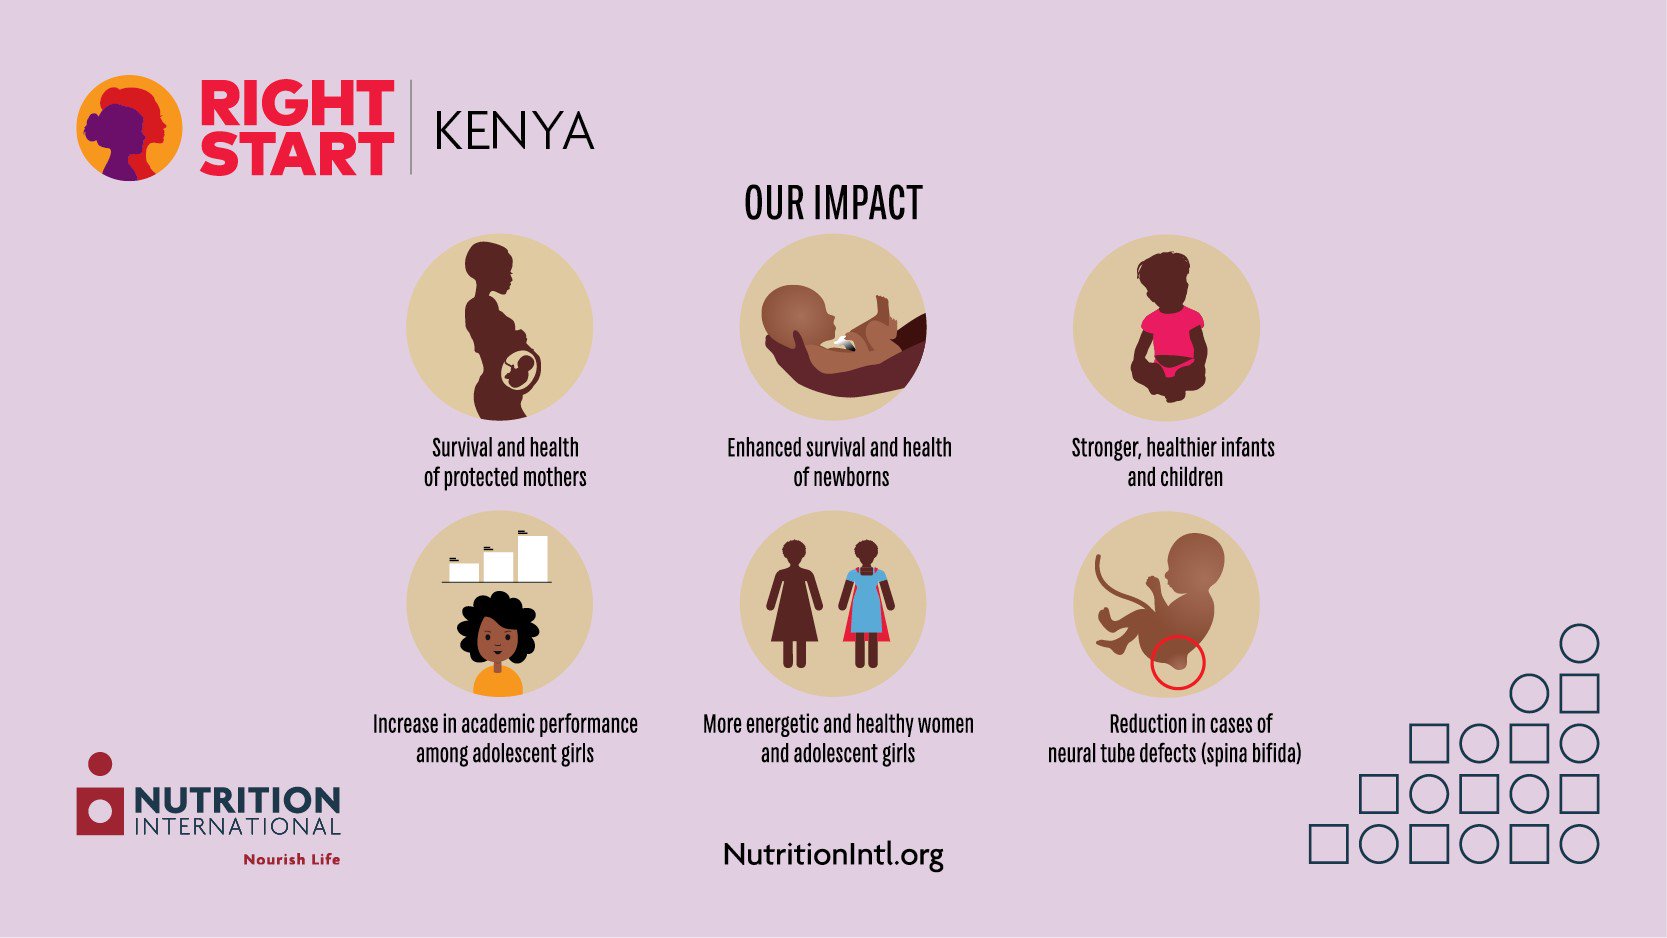 Nutrition International empowers women and girls in Kenya through the Right Start Initiative